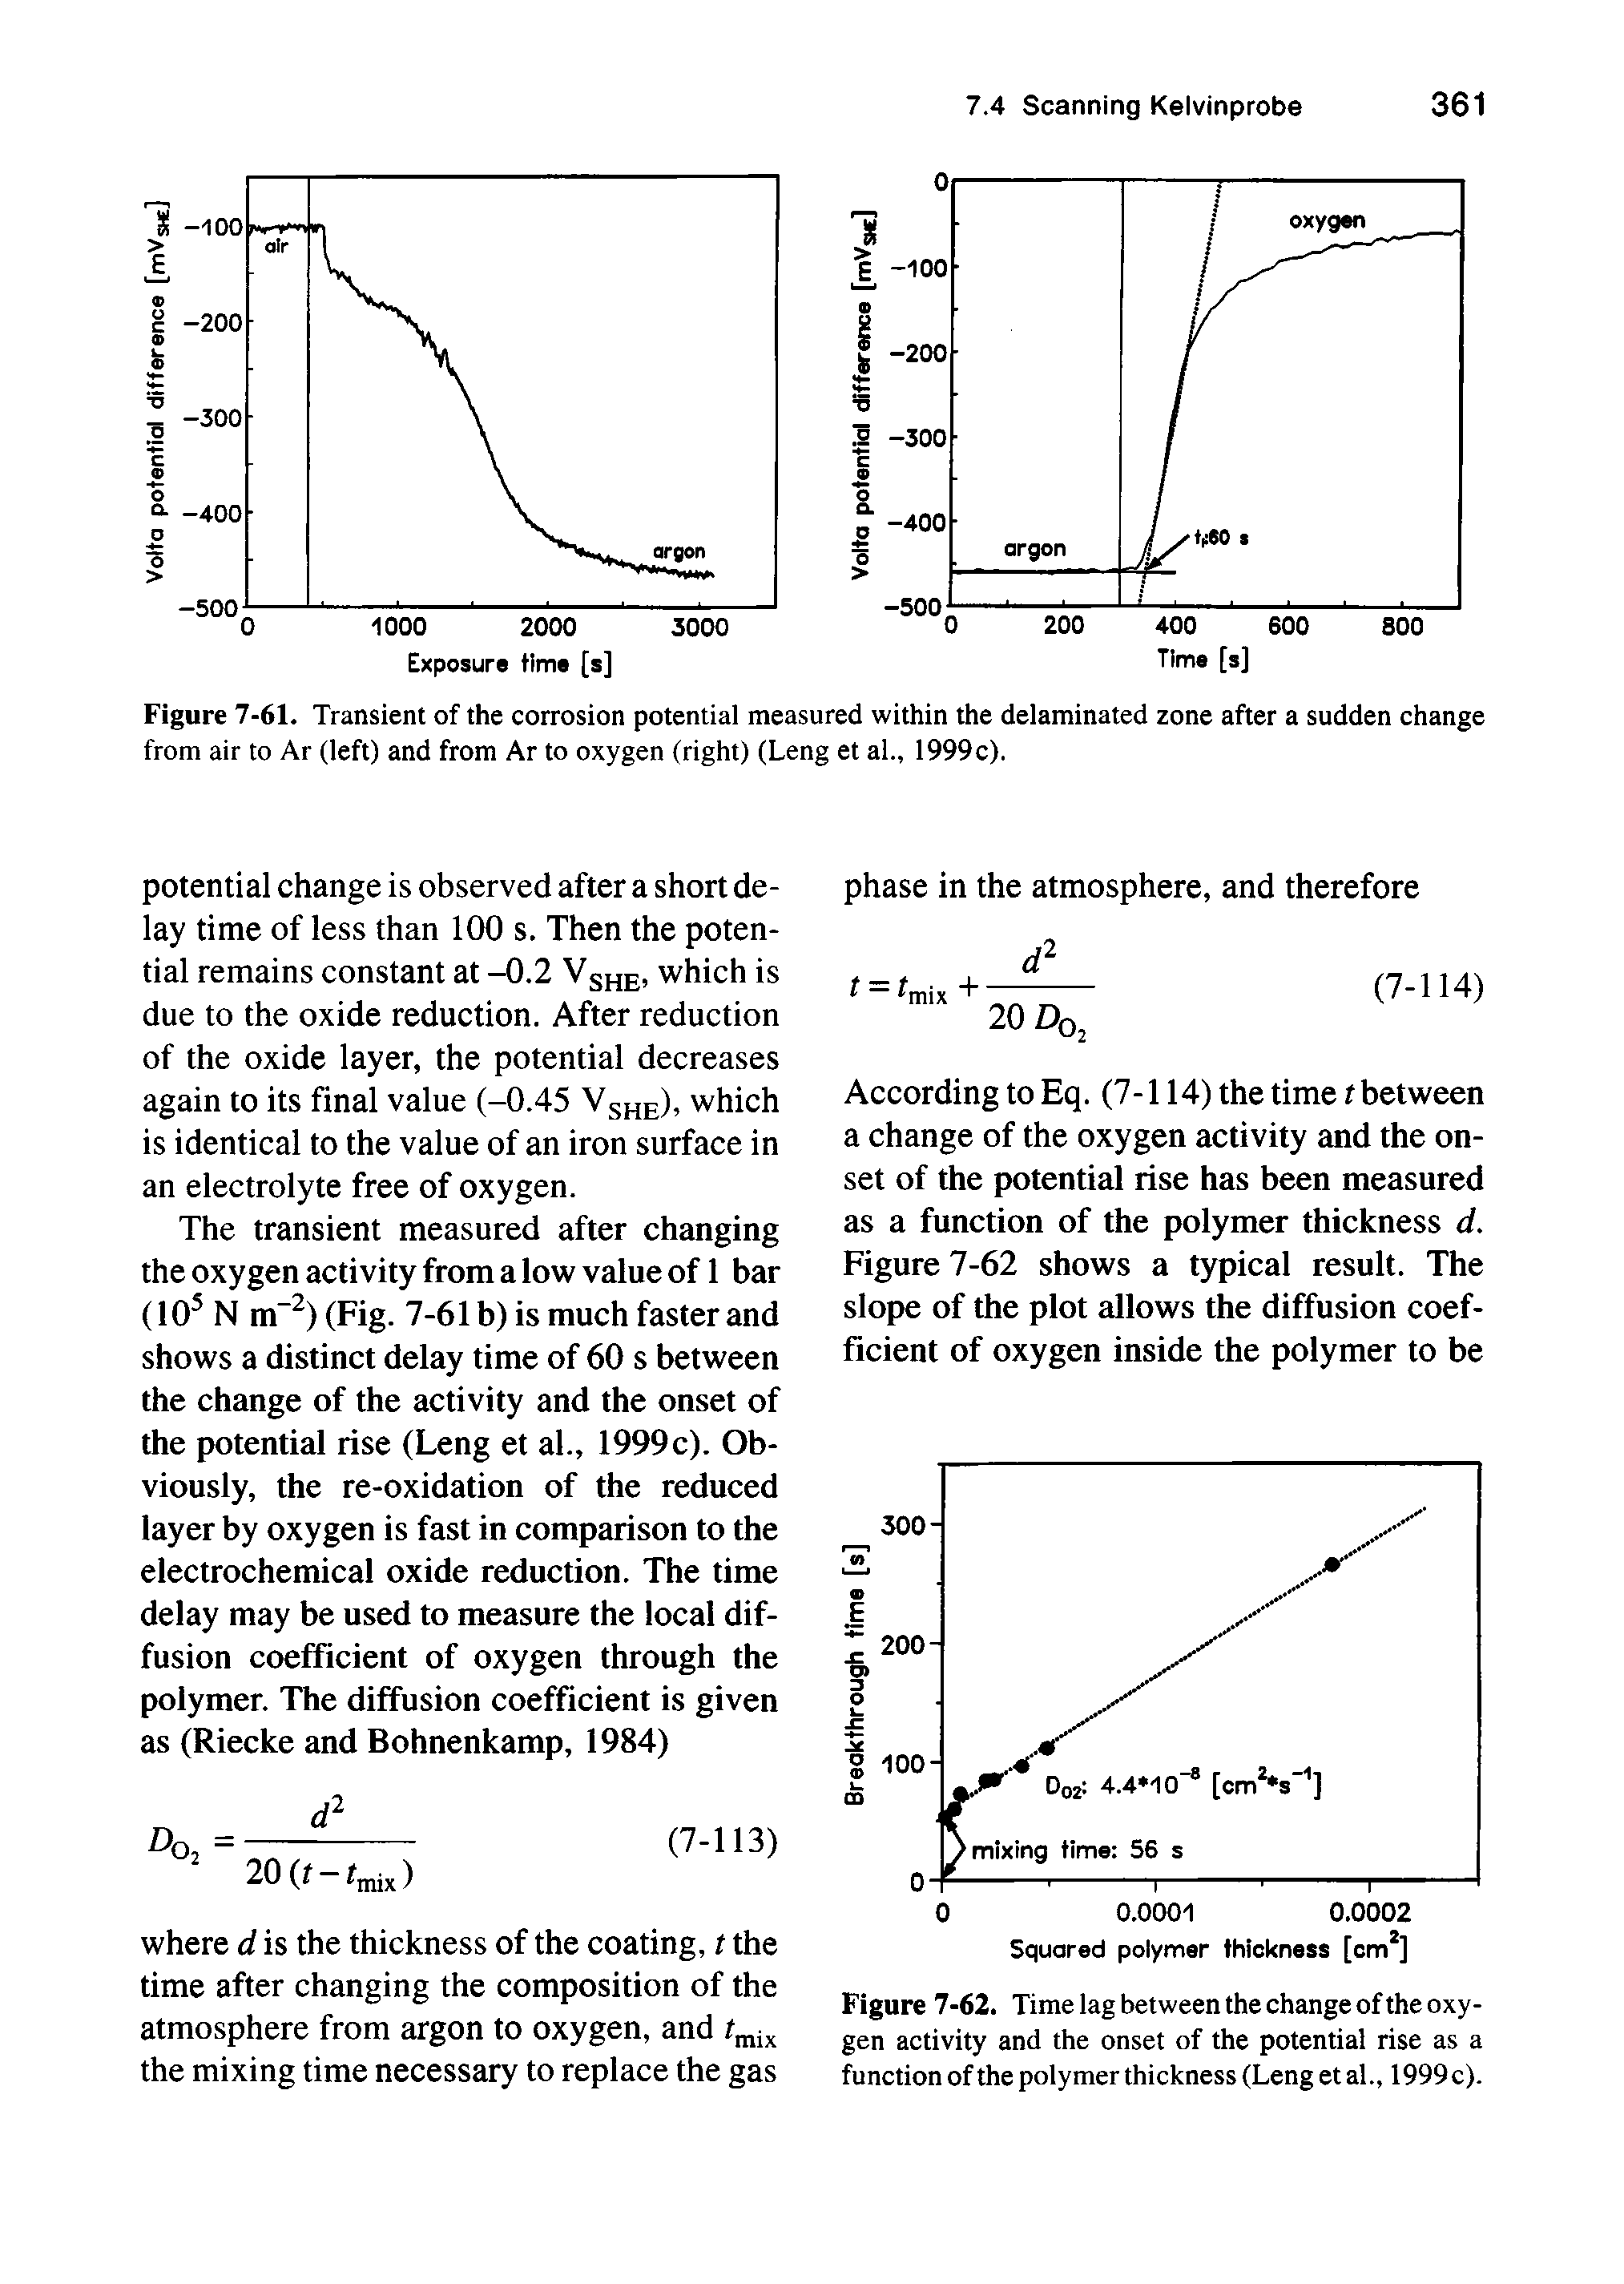 Figure 7-61. Transient of the corrosion potential measured within the delaminated zone after a sudden change from air to Ar (left) and from Ar to oxygen (right) (Leng et al., 1999c).